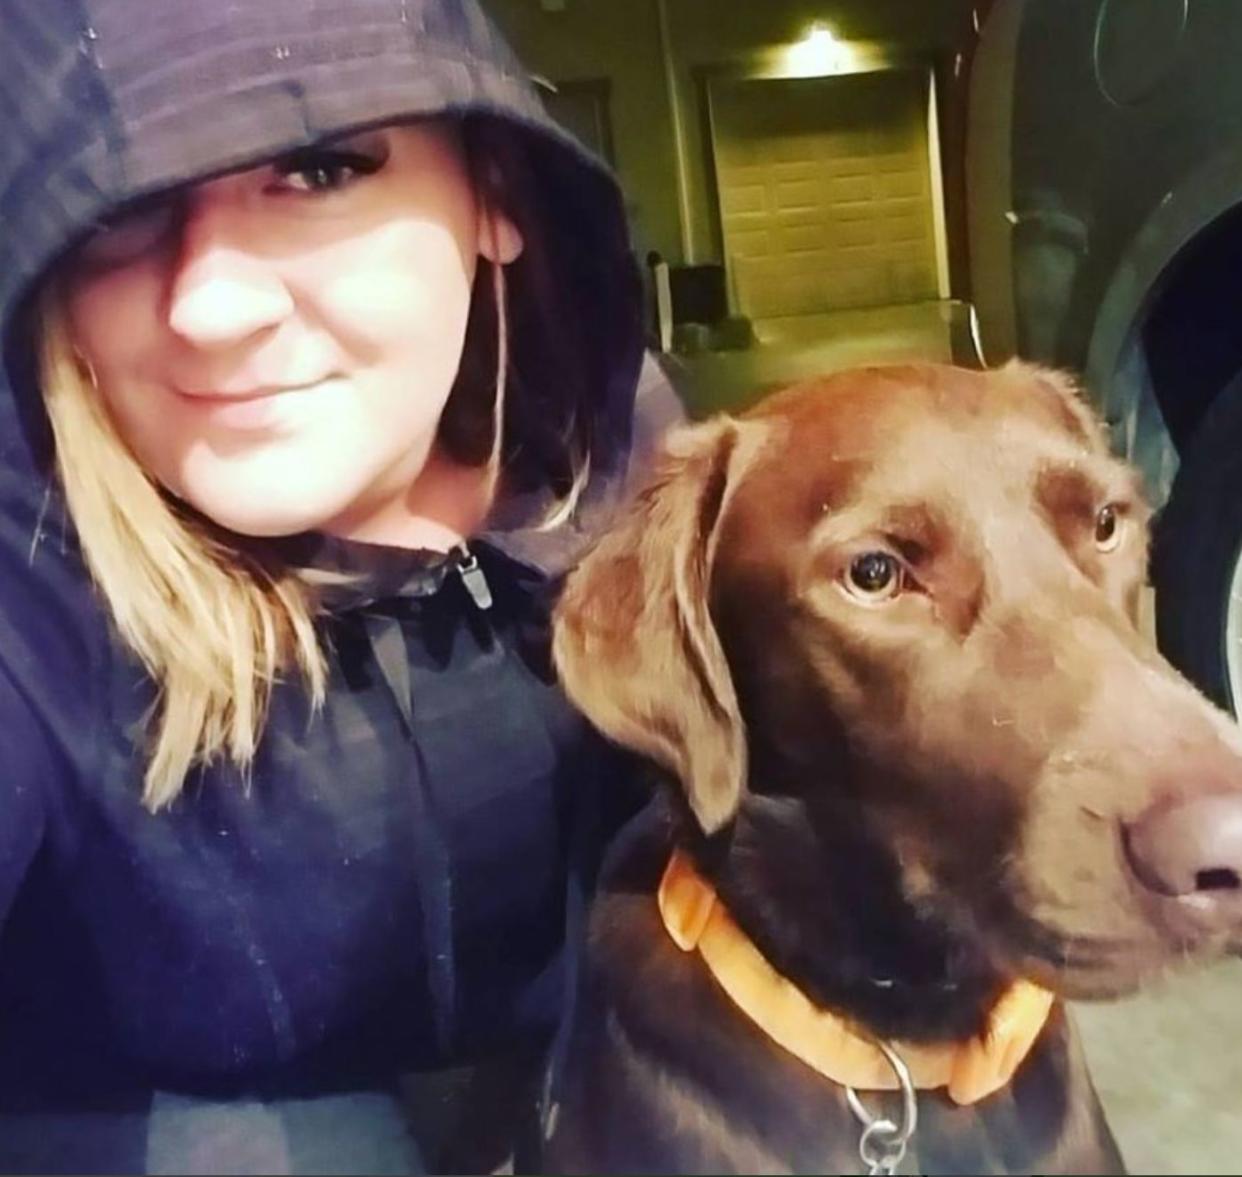 Stephanie Carruthers, who uses the handle Snow, is a "white hat" hacker. Her dog Eros helps her fight crime online. (Photo: Courtesy of Snow)